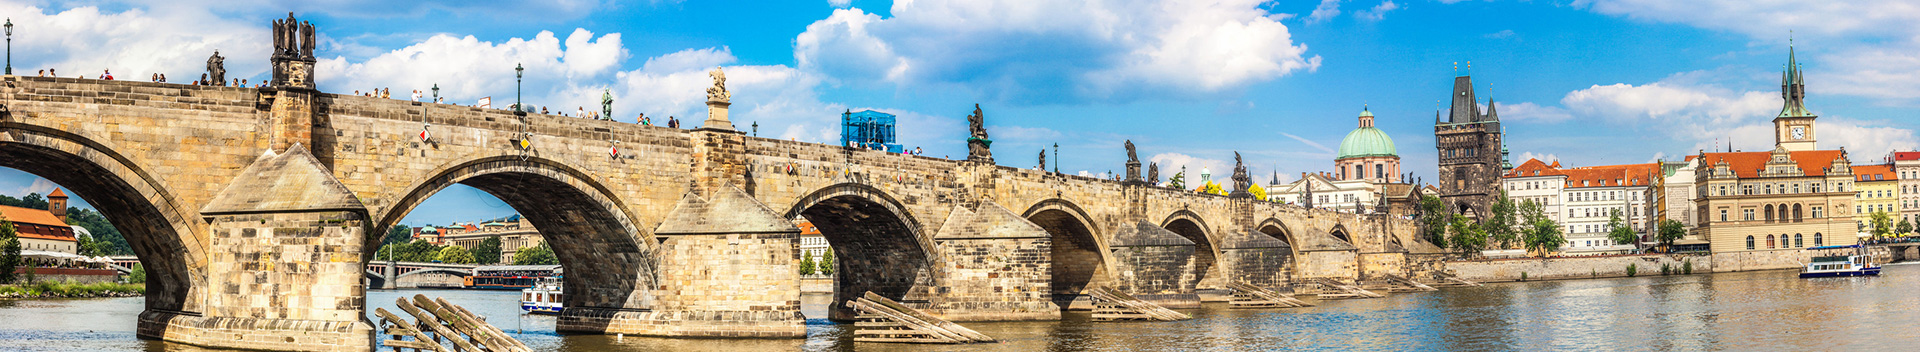 Special Places to visit in Prague